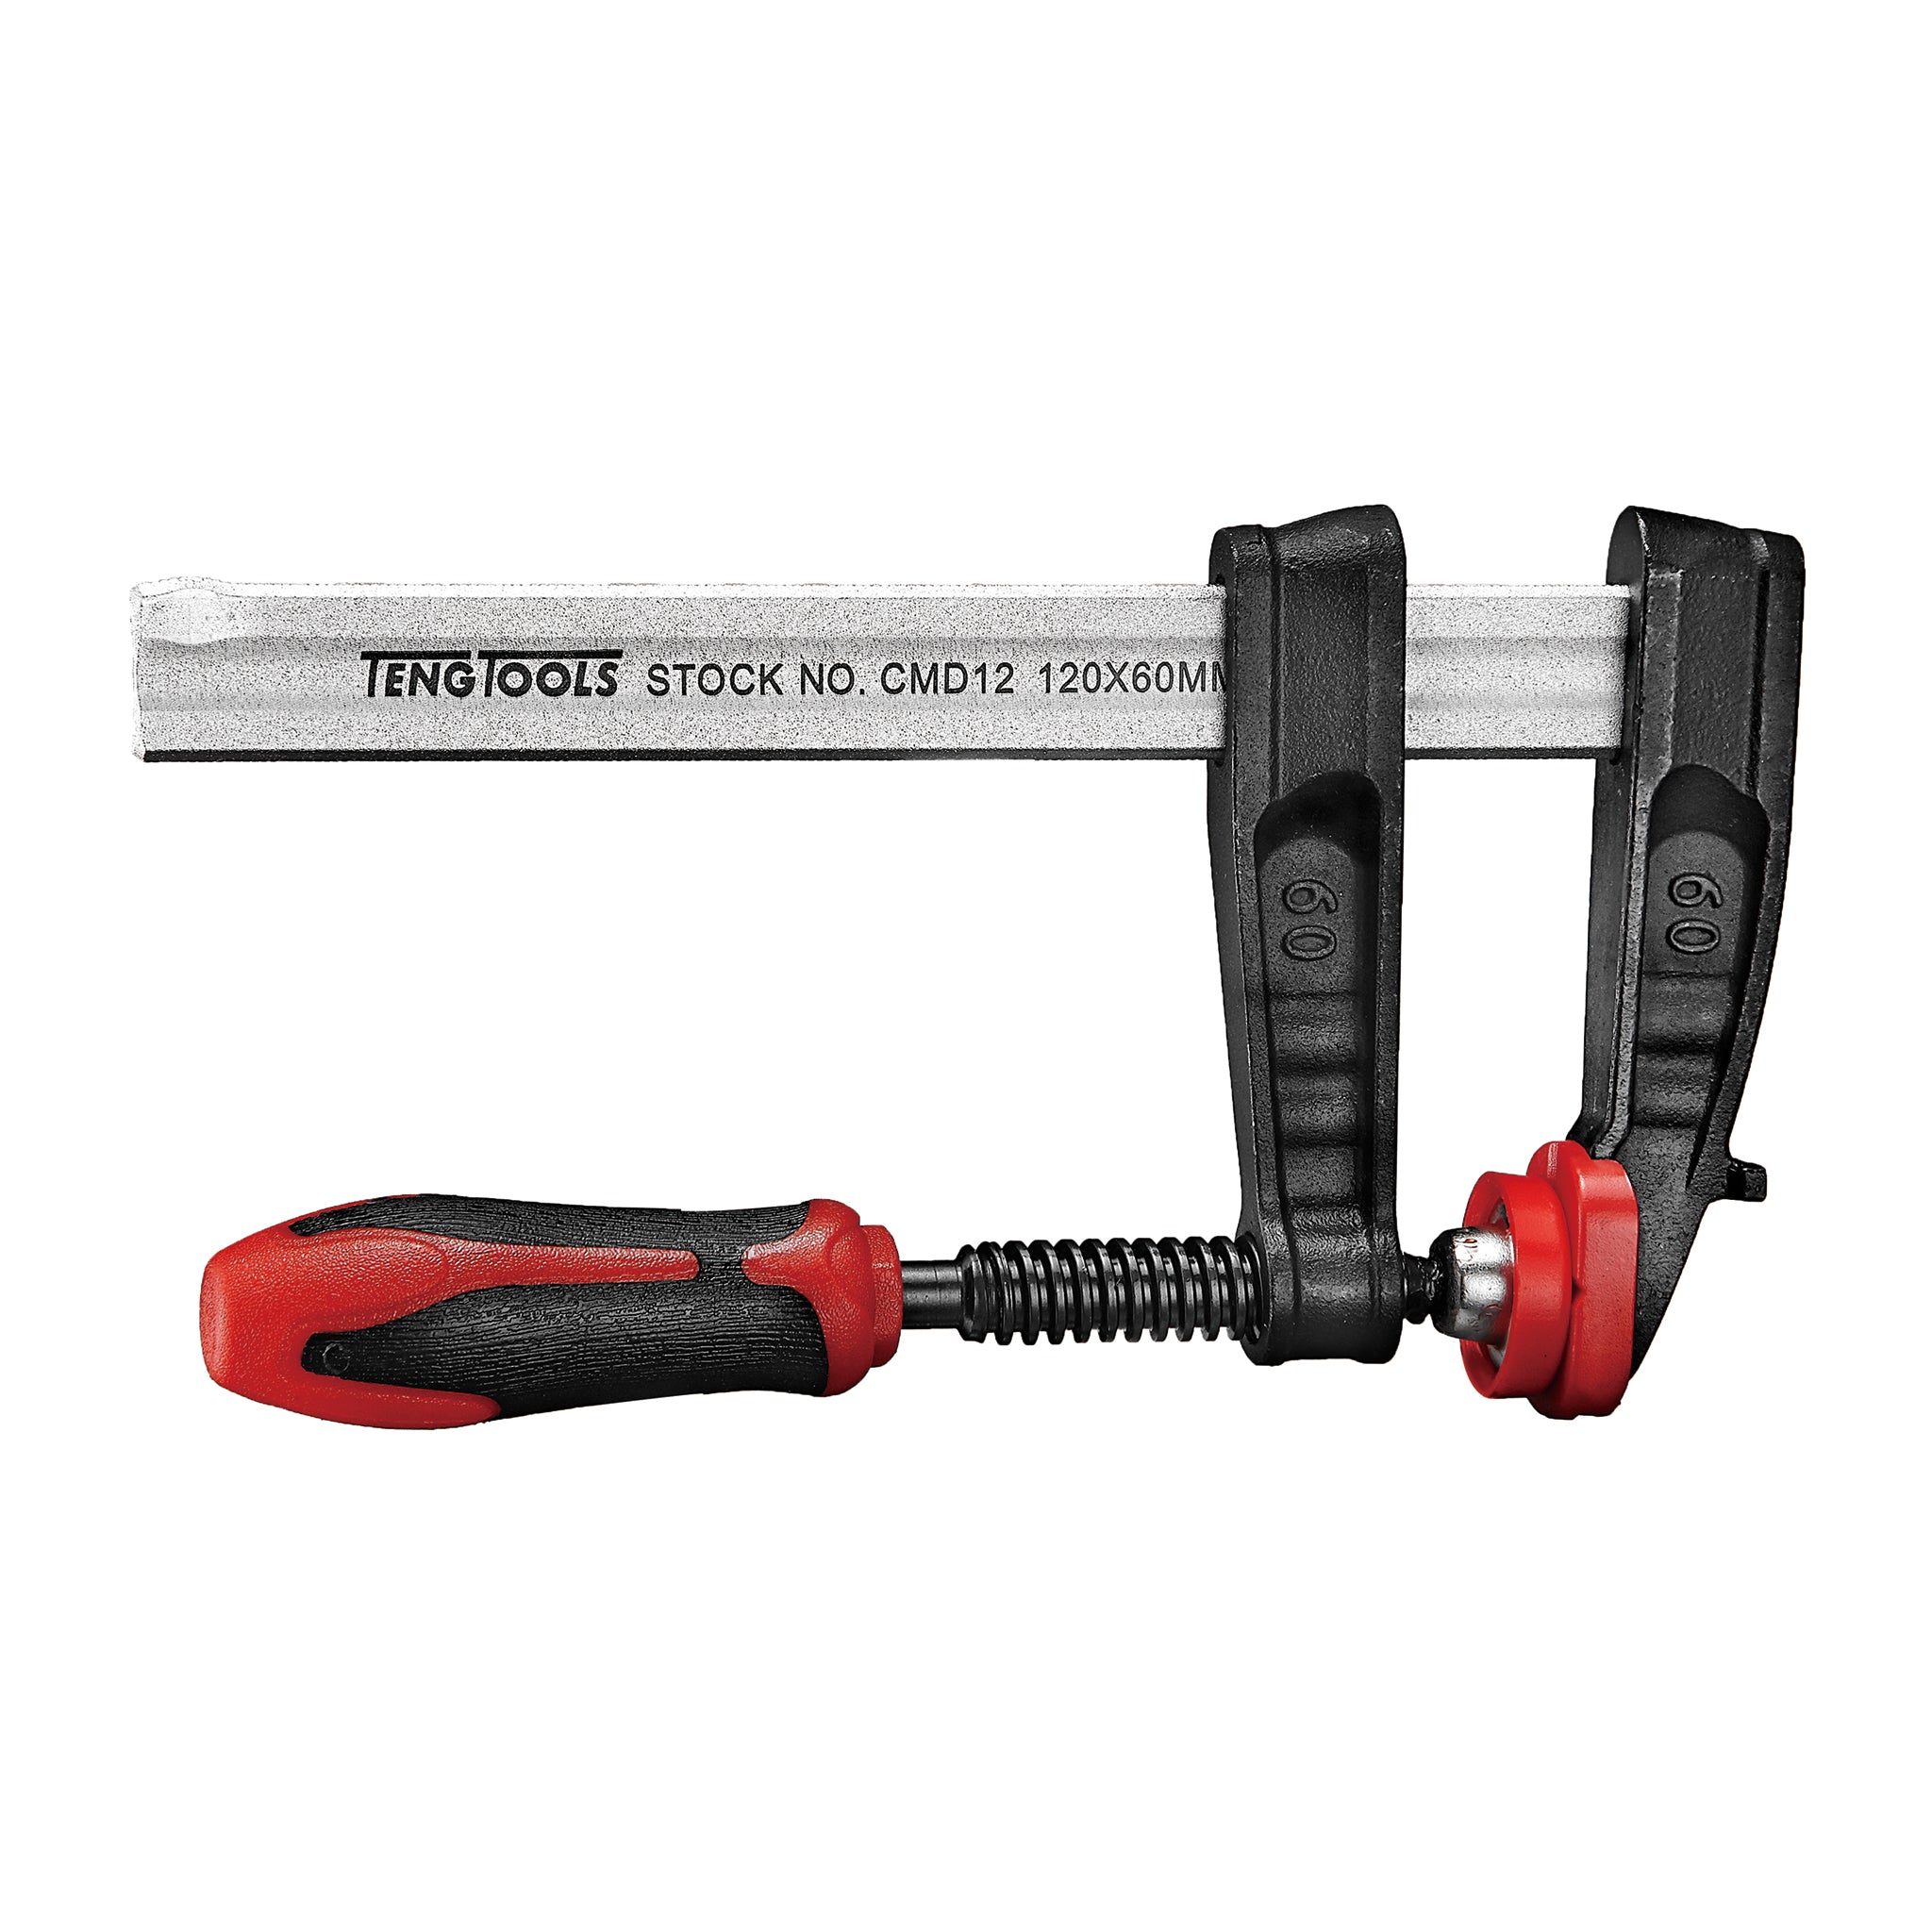 Teng Tools F-Clamps With Bi Material Handles - 160x80MM